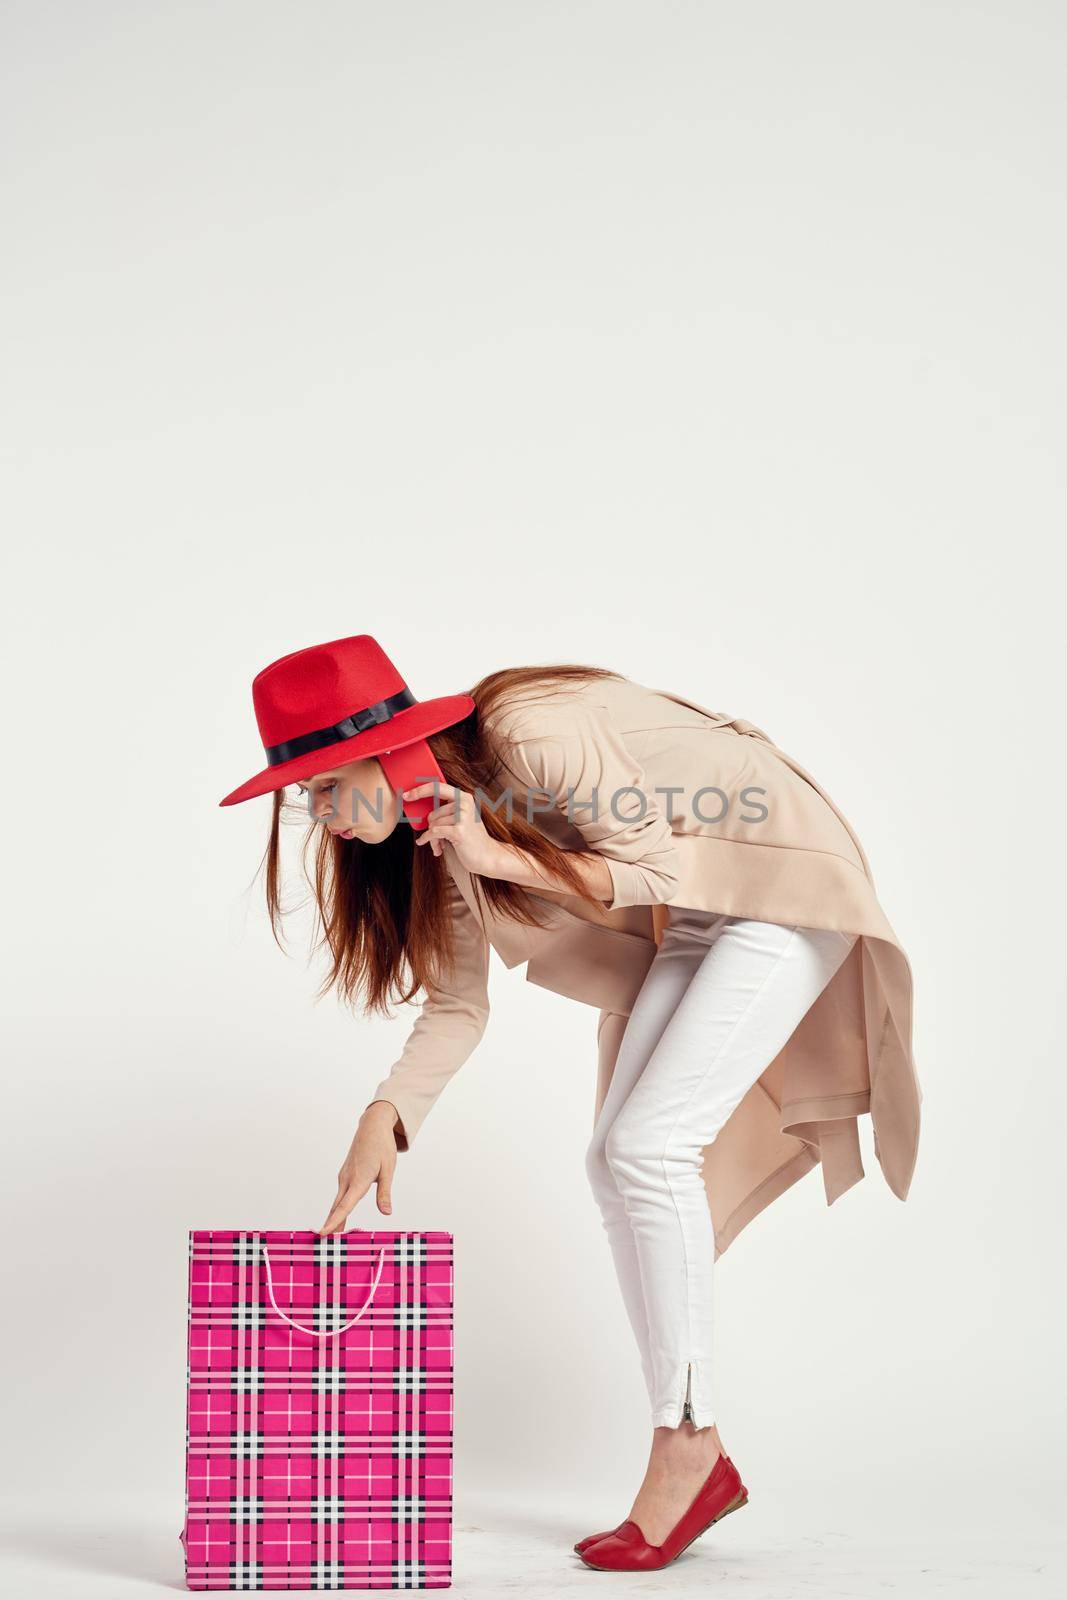 cheerful woman wearing a red hat posing shopping fun light background. High quality photo